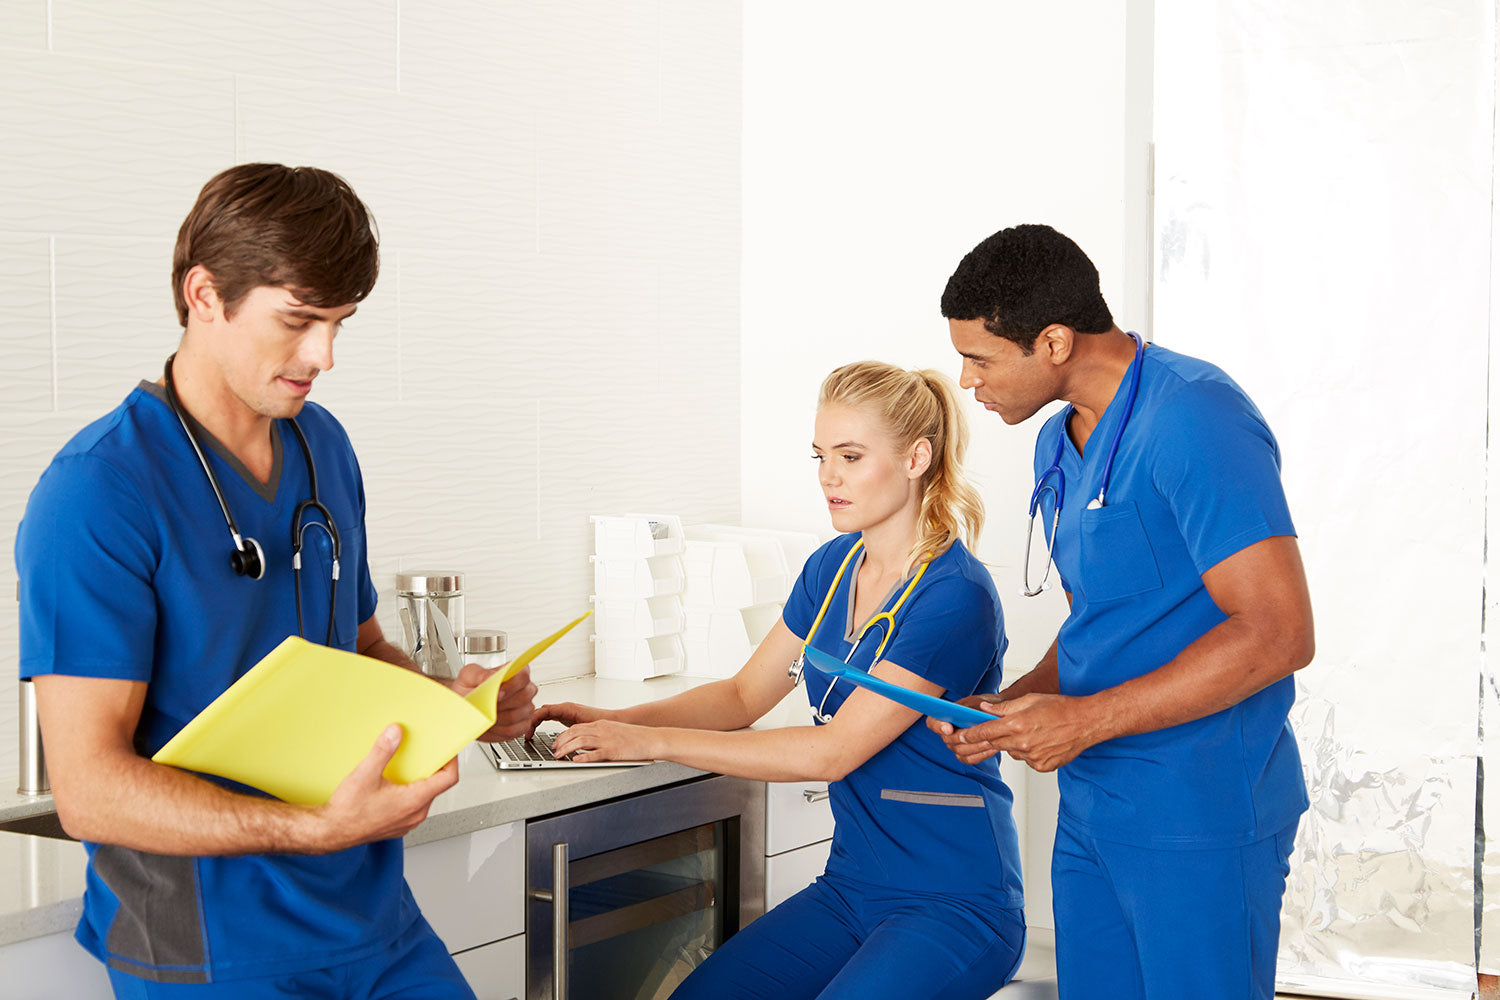 The Dos and Don'ts of Wearing Scrubs for Healthcare Travelers - Sunbelt  Staffing